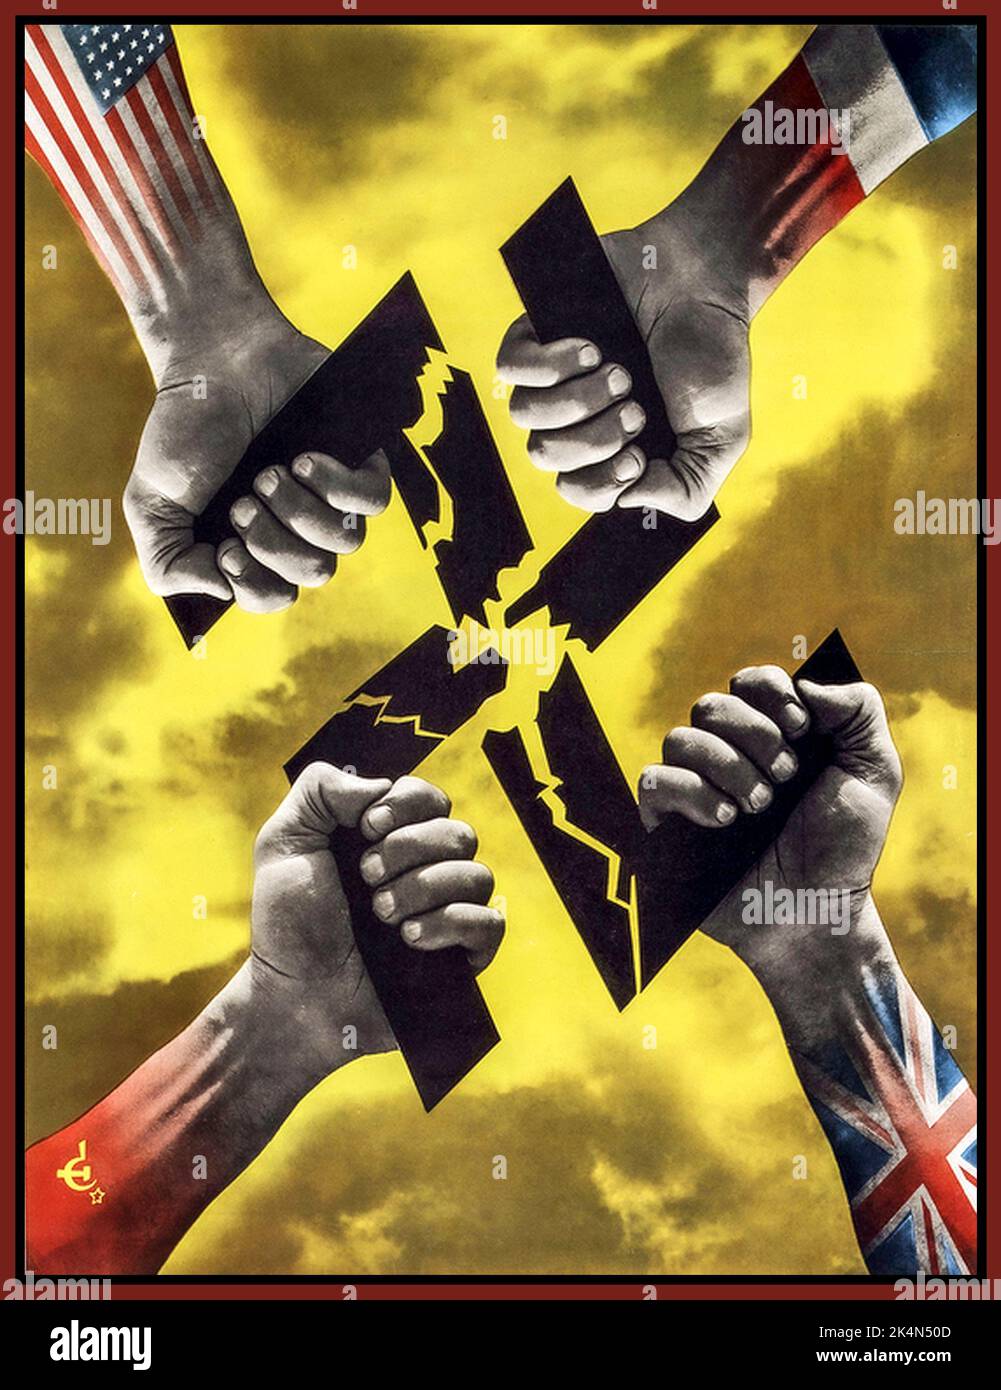 WW2 The Allied powers of USA, France, Great Britain and Soviet Union, propaganda poster of Anti-Nazi anti Hitler coalition with collective allies hands breaking apart a Nazi Germany black Swastika Symbol. World War II Second World War Stock Photo